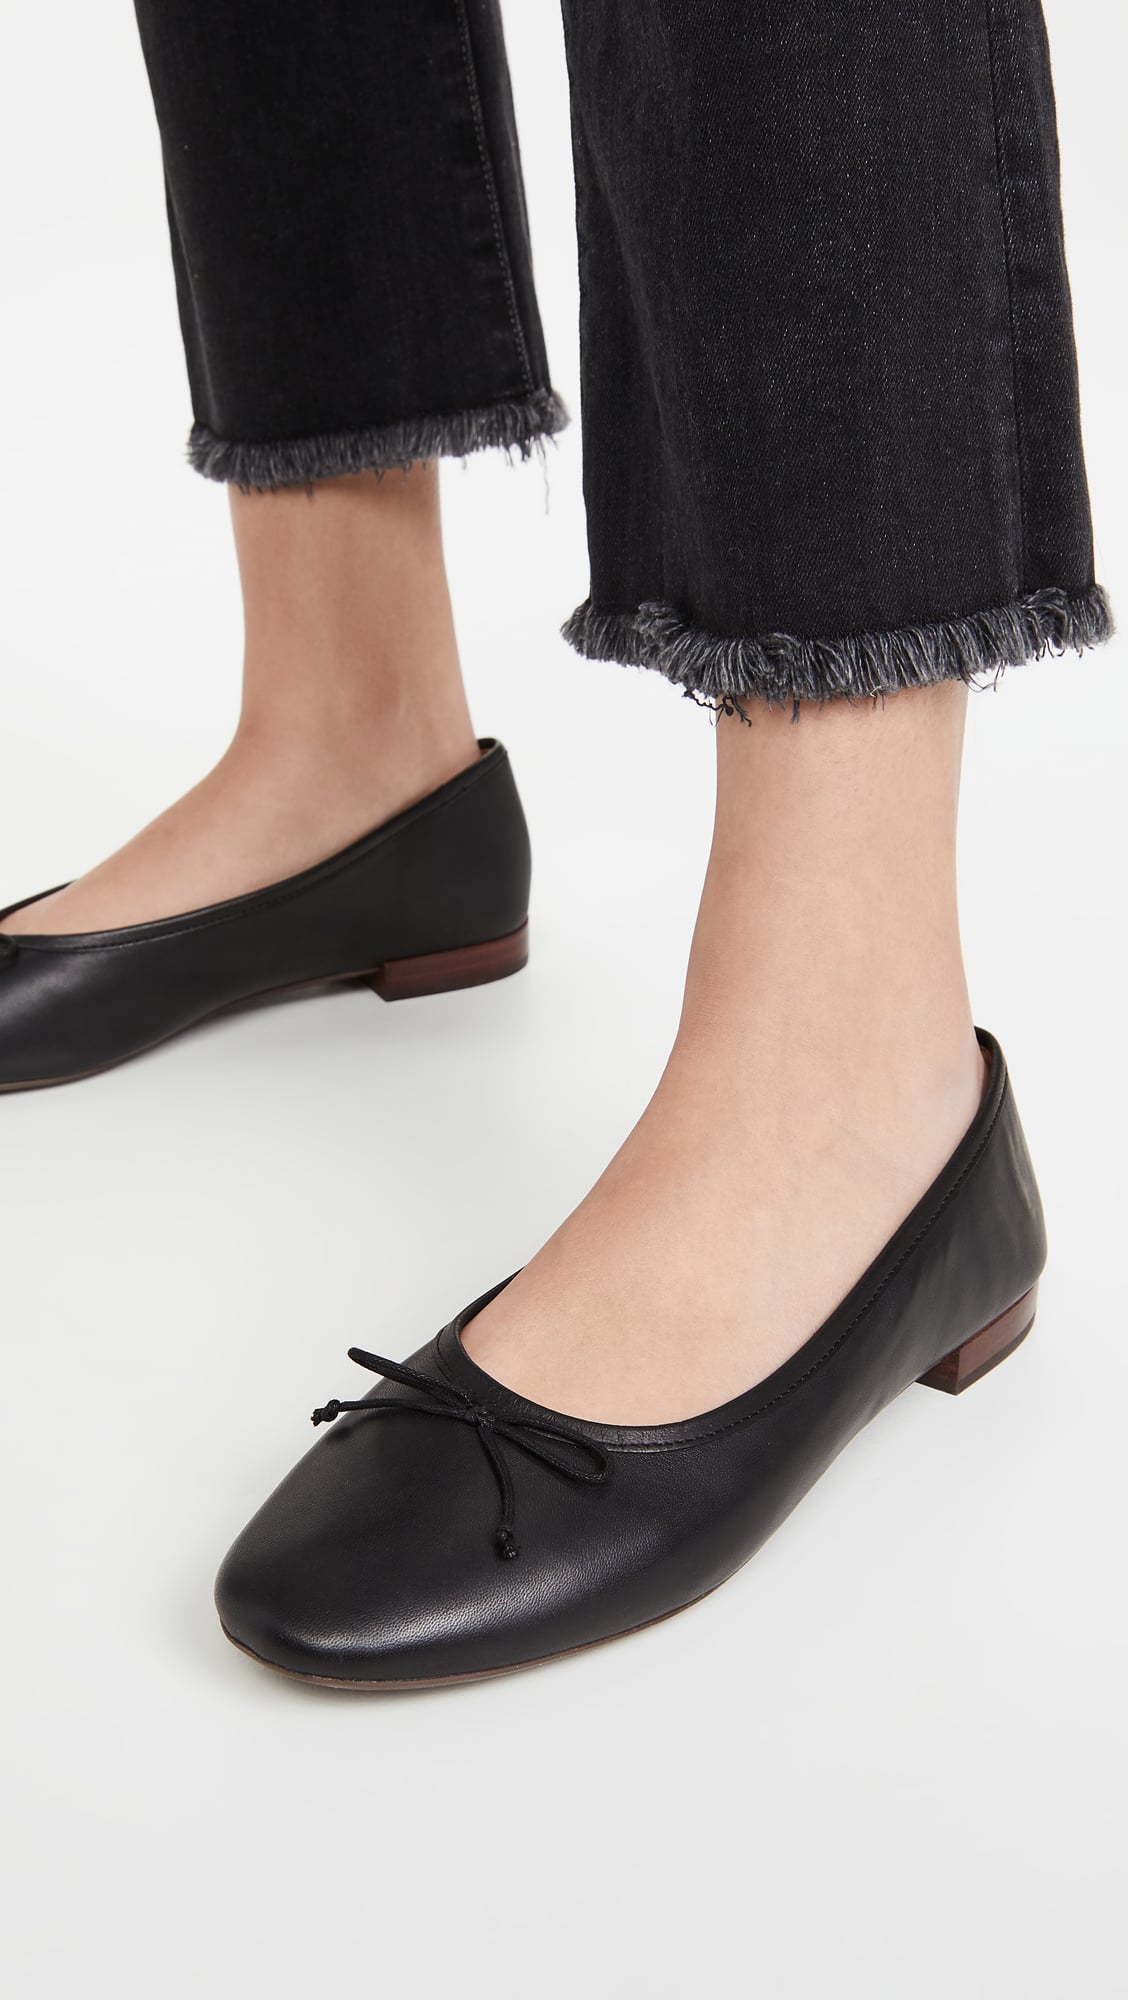 Madewell Adelle Ballet Flats | 20 Cute Shoes You're Going to Want to Wear  For Spring, Summer, and Beyond | POPSUGAR Fashion Photo 9